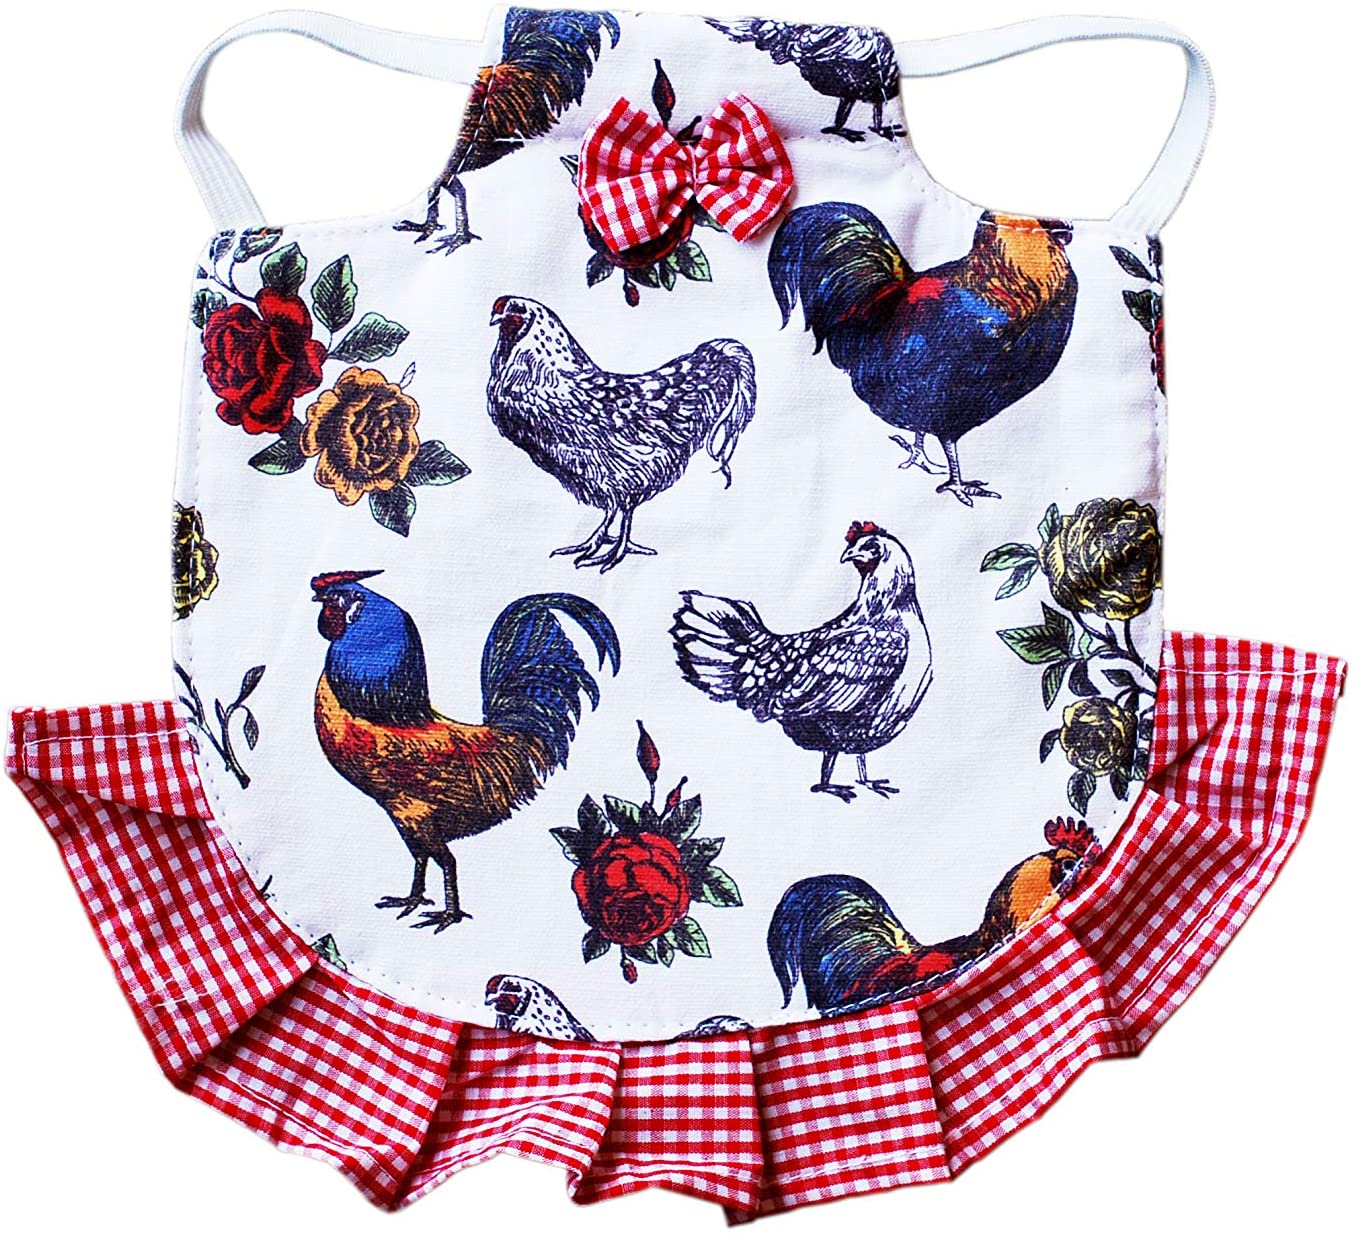 HEN COUTURE Hen Saddle Single Strap Apron Jacket Standard Size Chicken Poultry (Red)